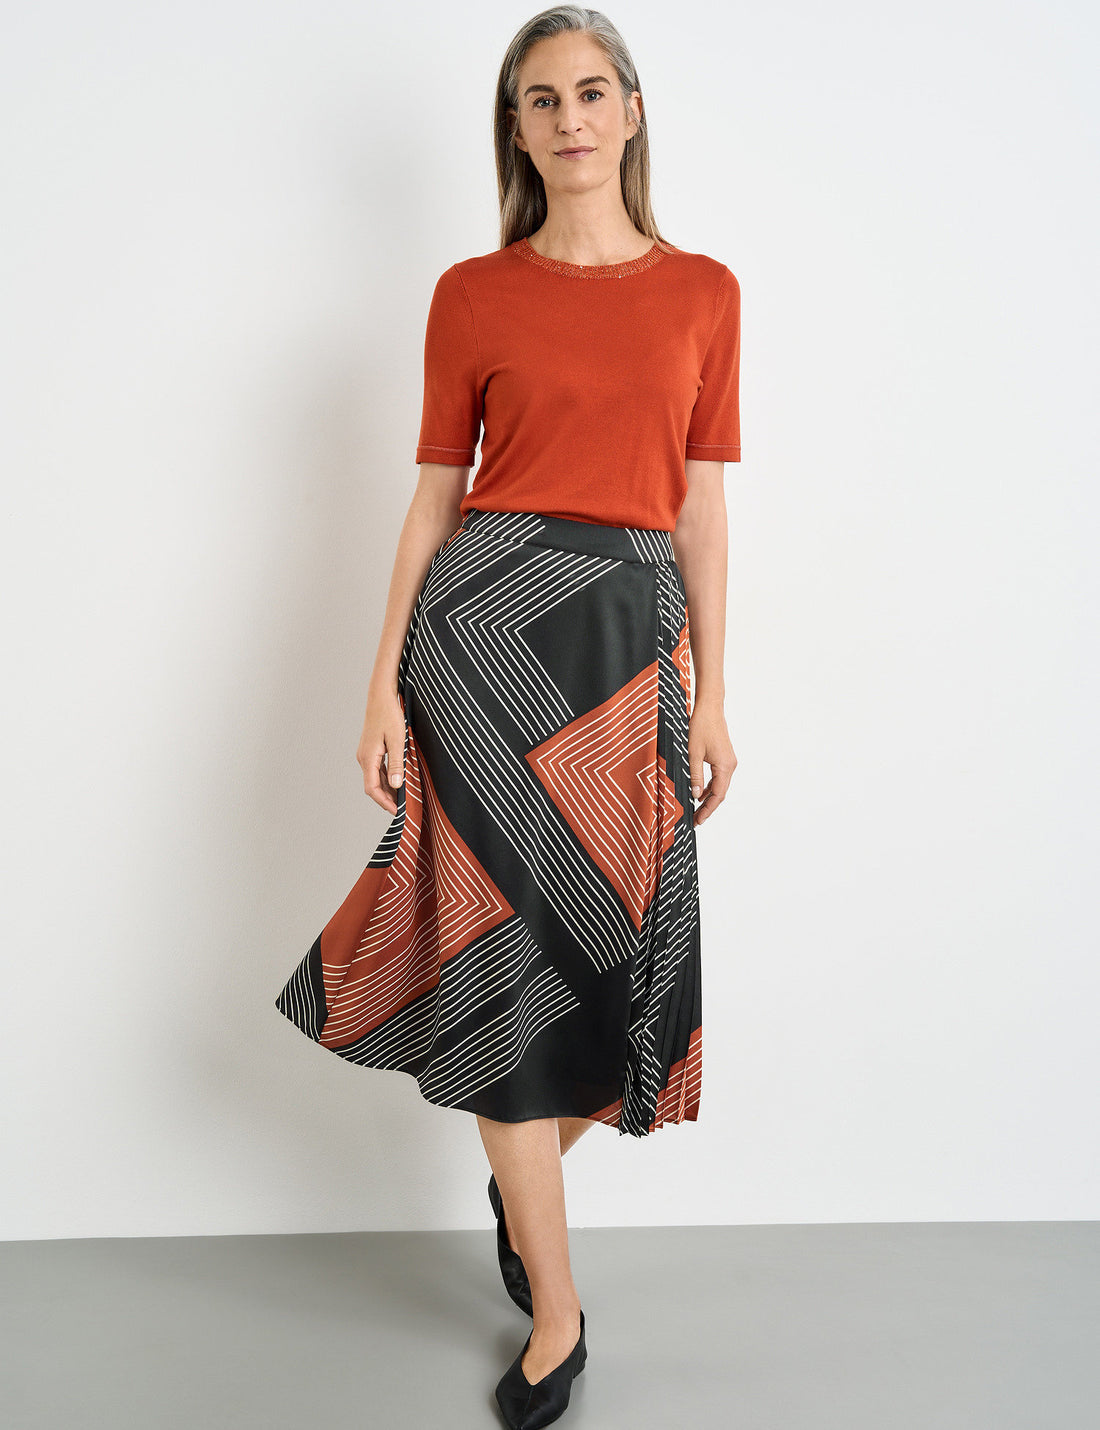 Midi Skirt With Pleated Detail_210016-31515_2070_01